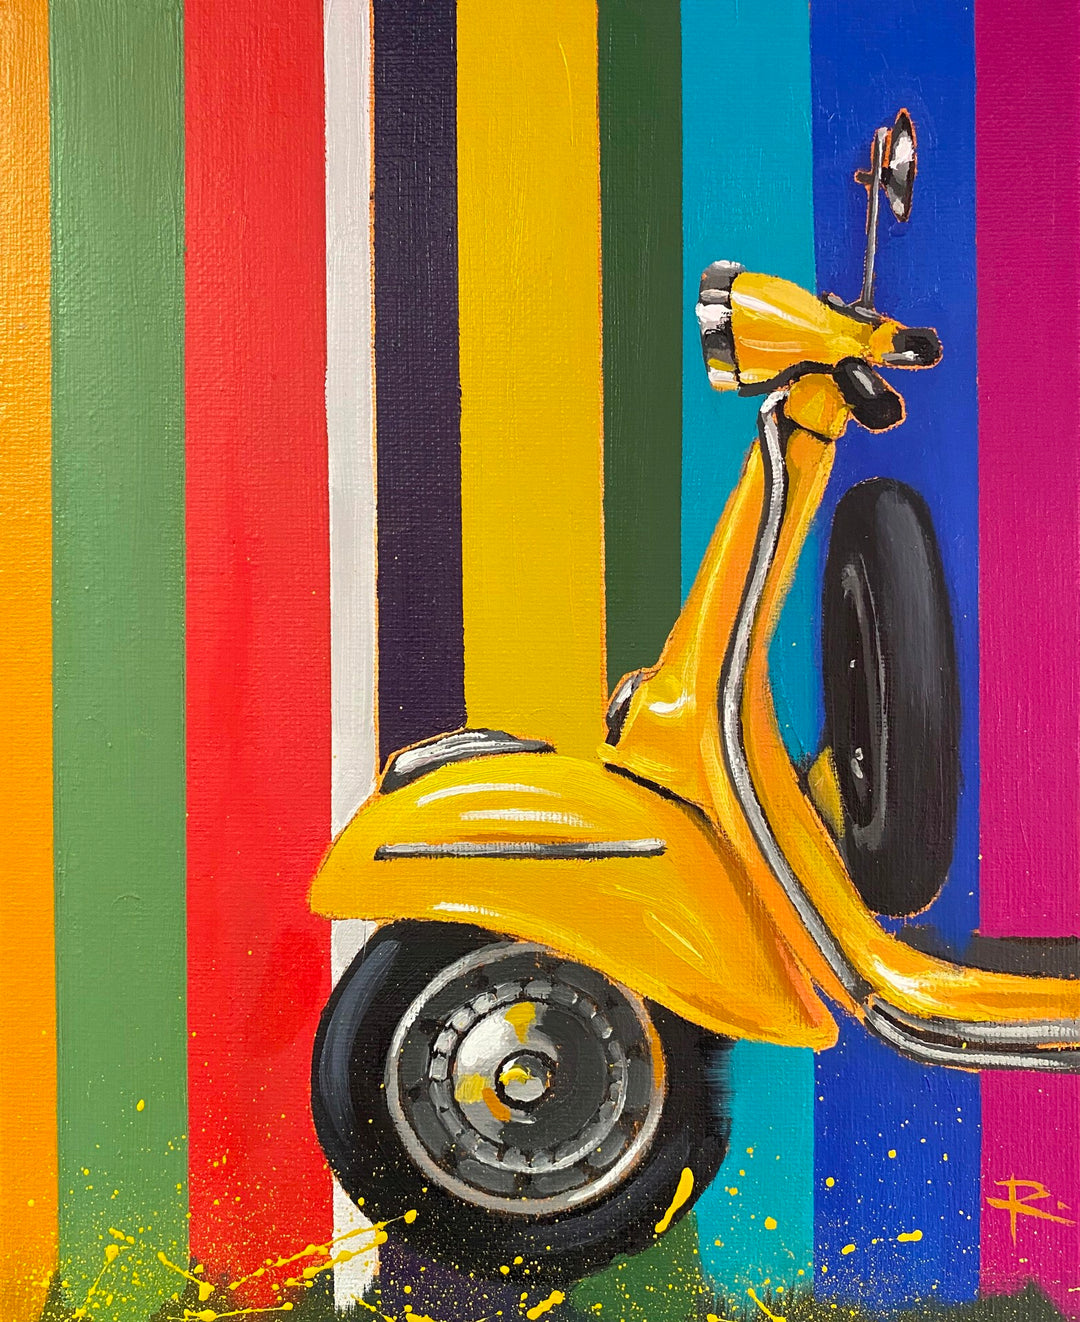 A vibrant painting featuring "Orvieto II feat. 1969 Vespa Sprint" by Rosa Fedele on a colorful background.